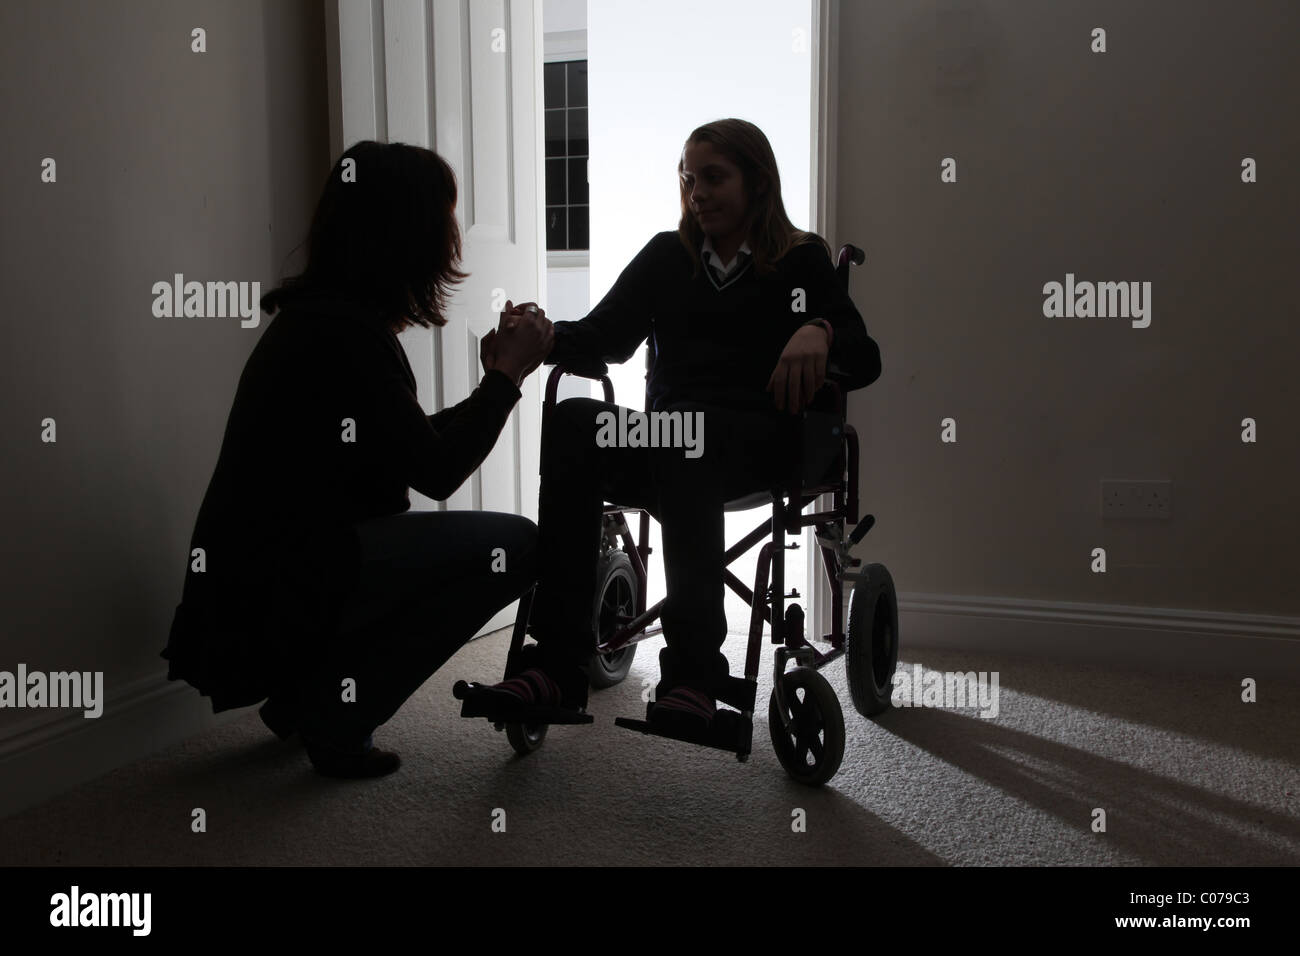 Woman comforting a young female sitting in a wheelchair, holding hands. Stock Photo